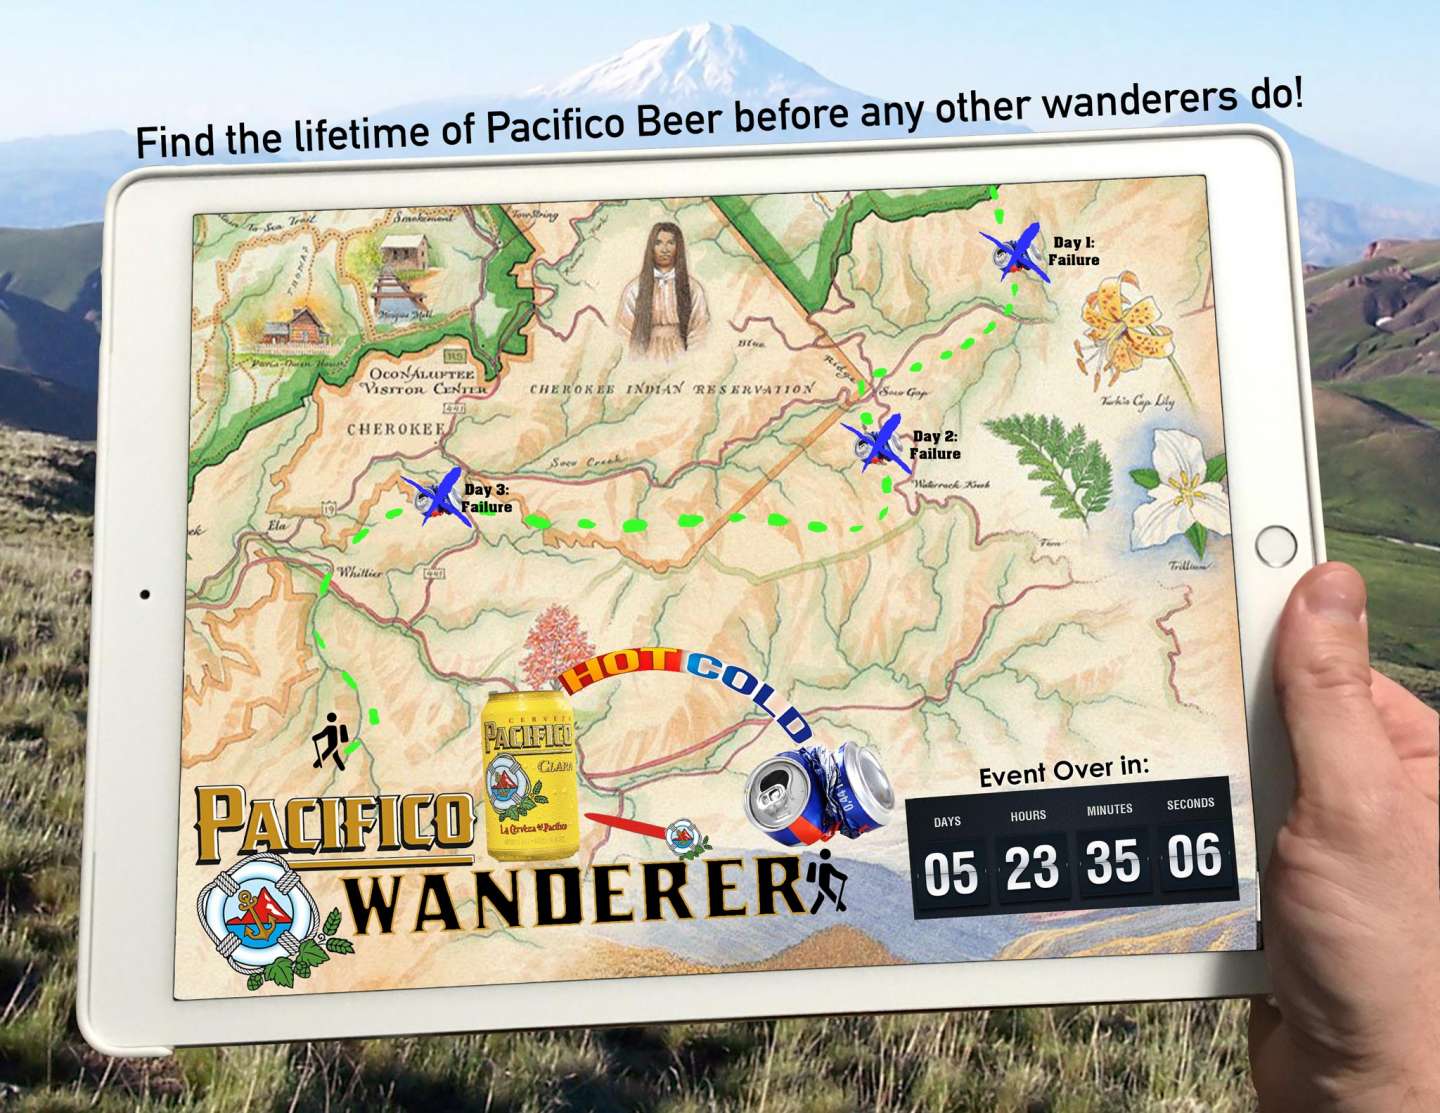 Pacifico: Wanderer